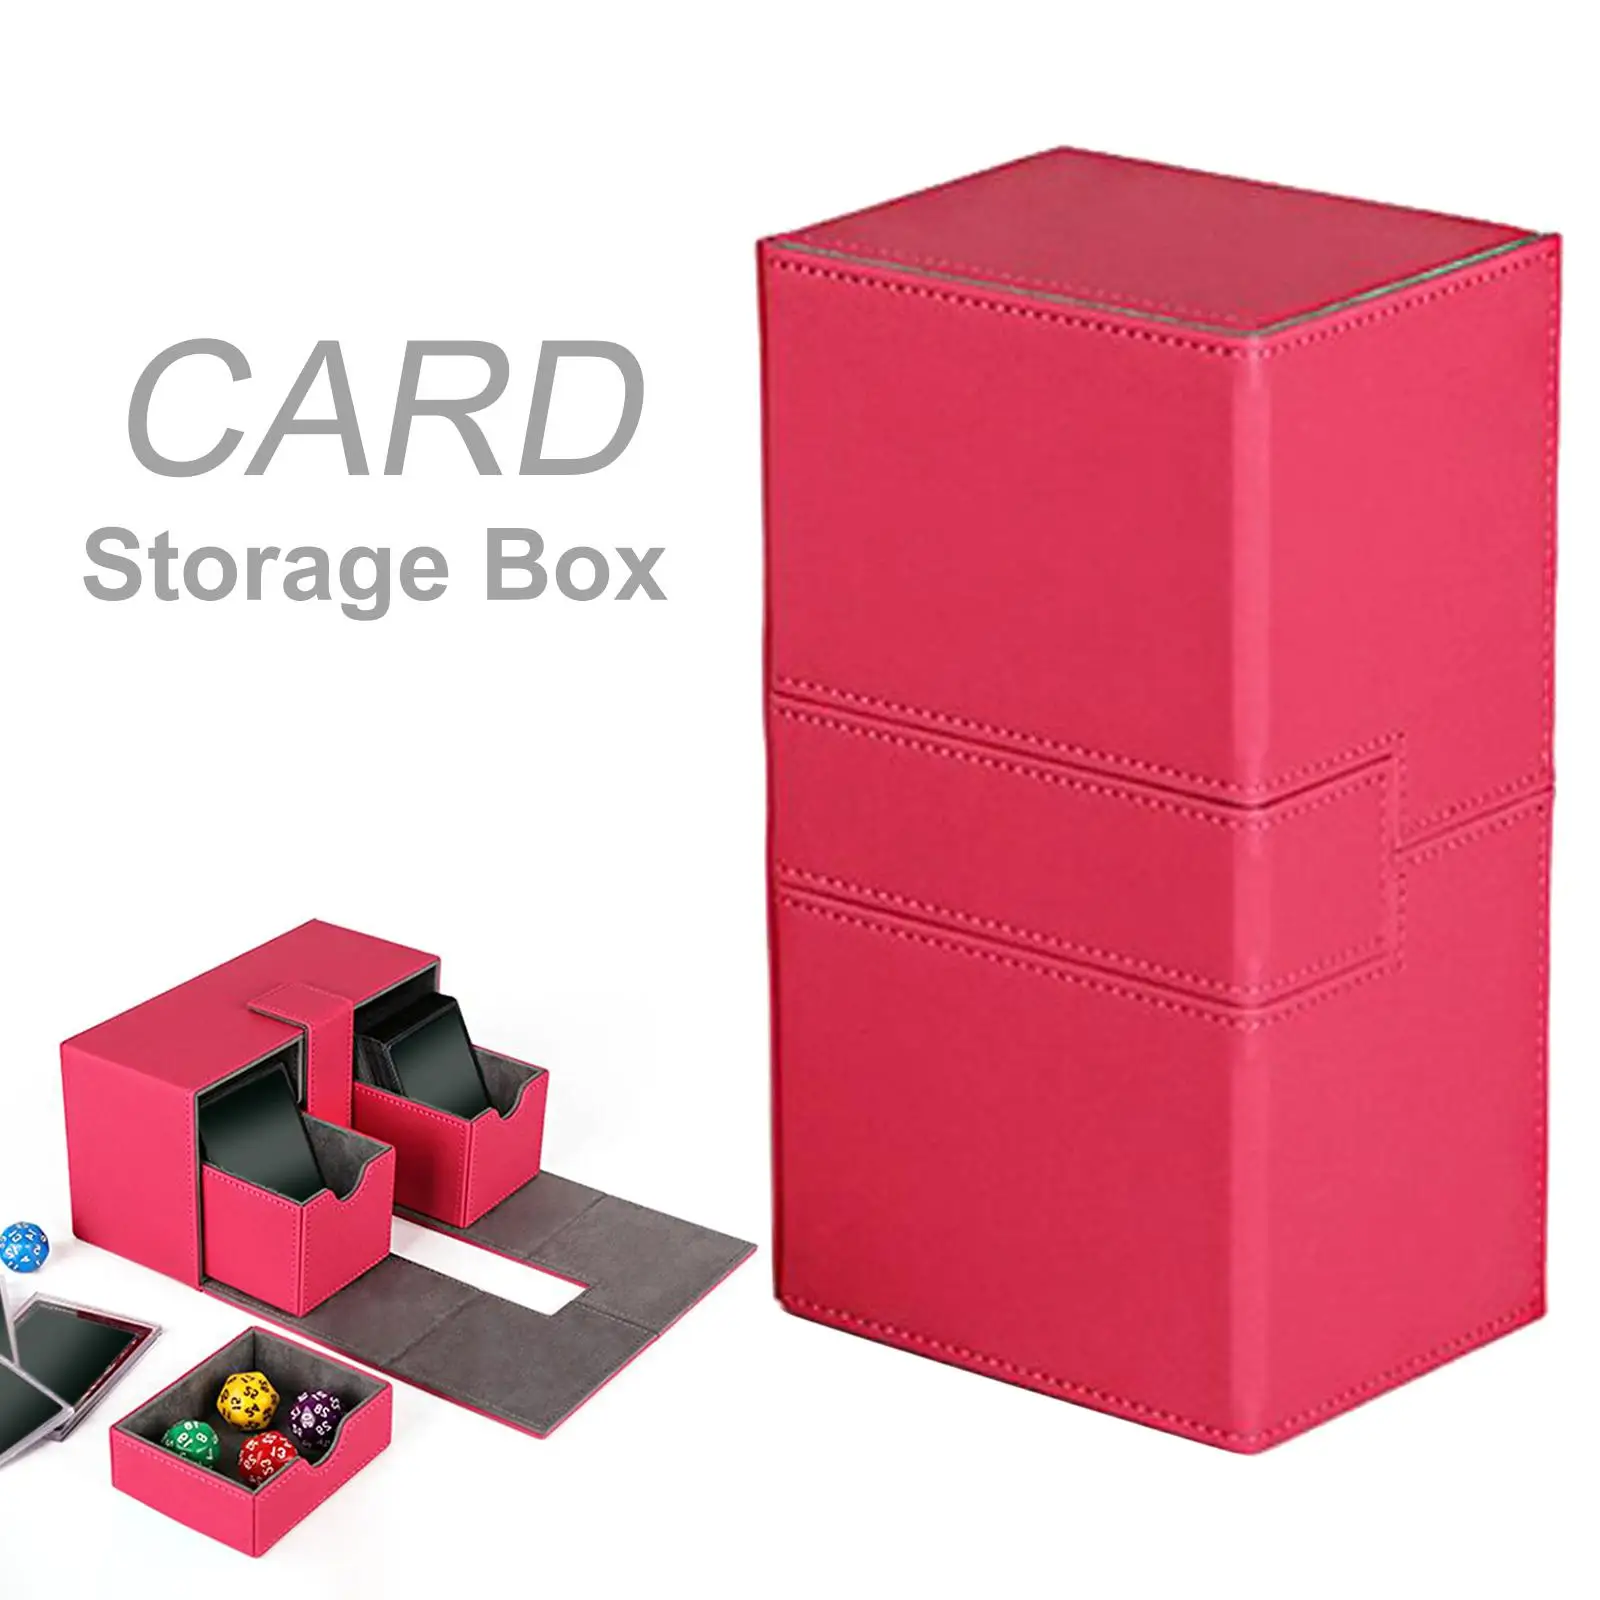 Premium Trading Card Deck Box Case Storage Organizer Holder Display Gathering Card Toy Collectible for Game Card Toys Hobbies